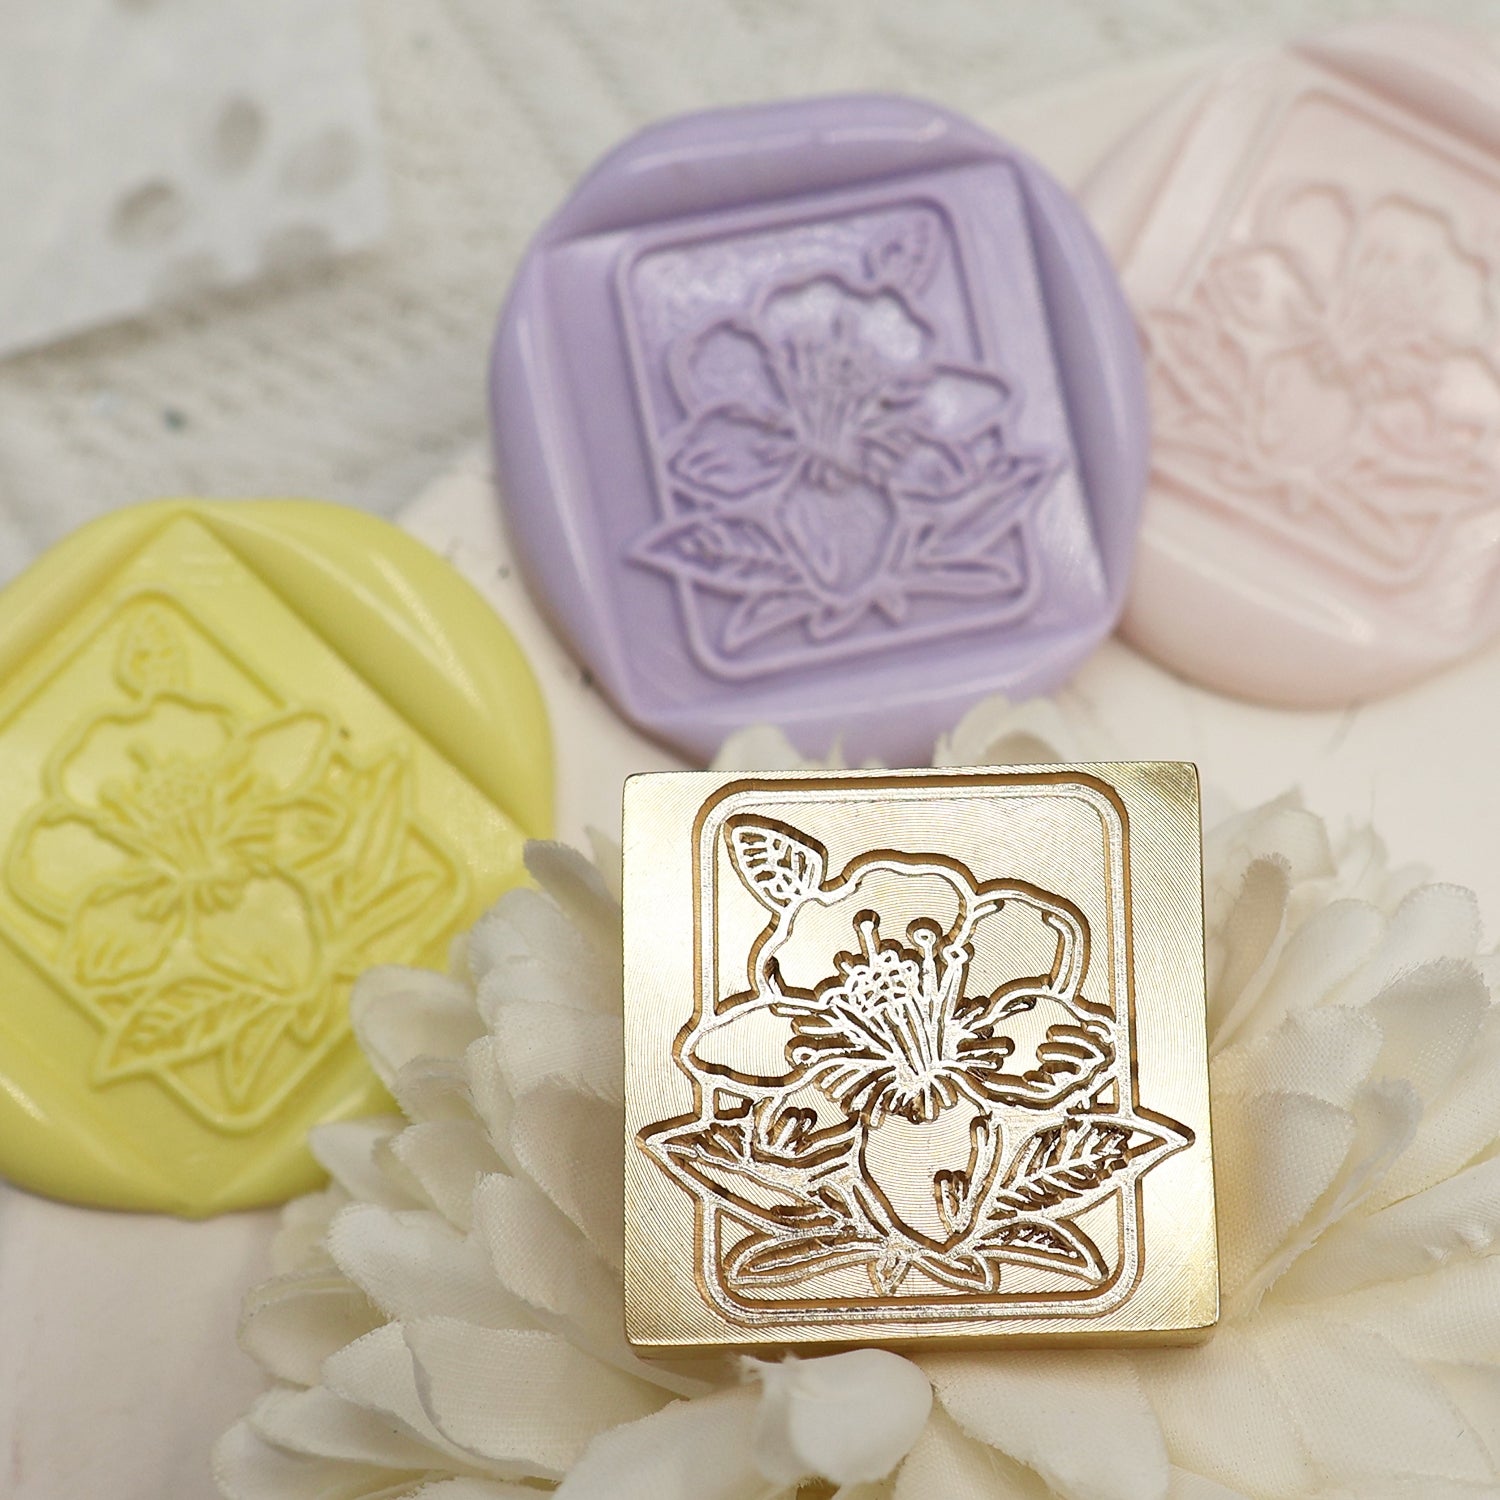 Rectangular & Square Fully Customized Wax Seal Stamp with Your Own Artwork 3